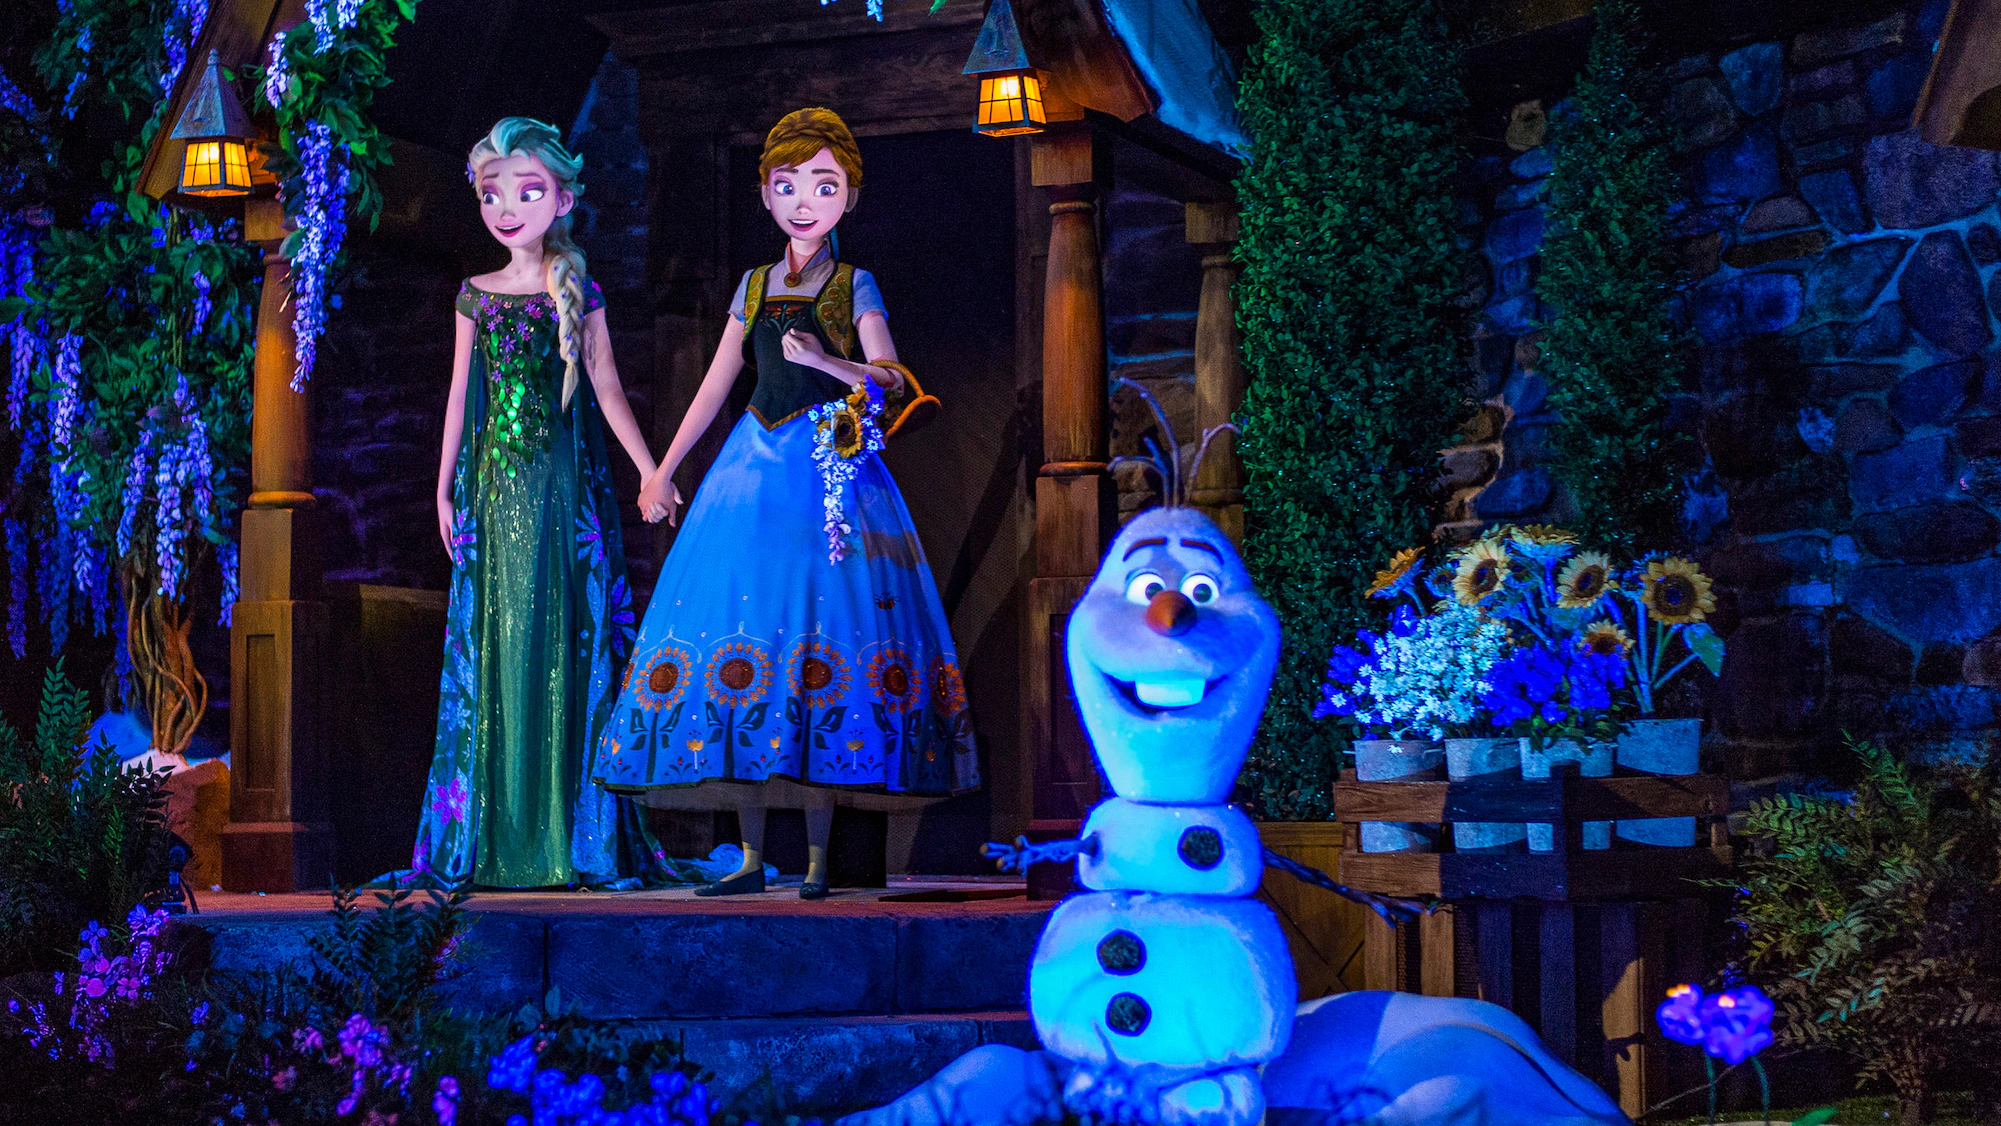 Elsa and Ana at the Frozen Ever After attraction